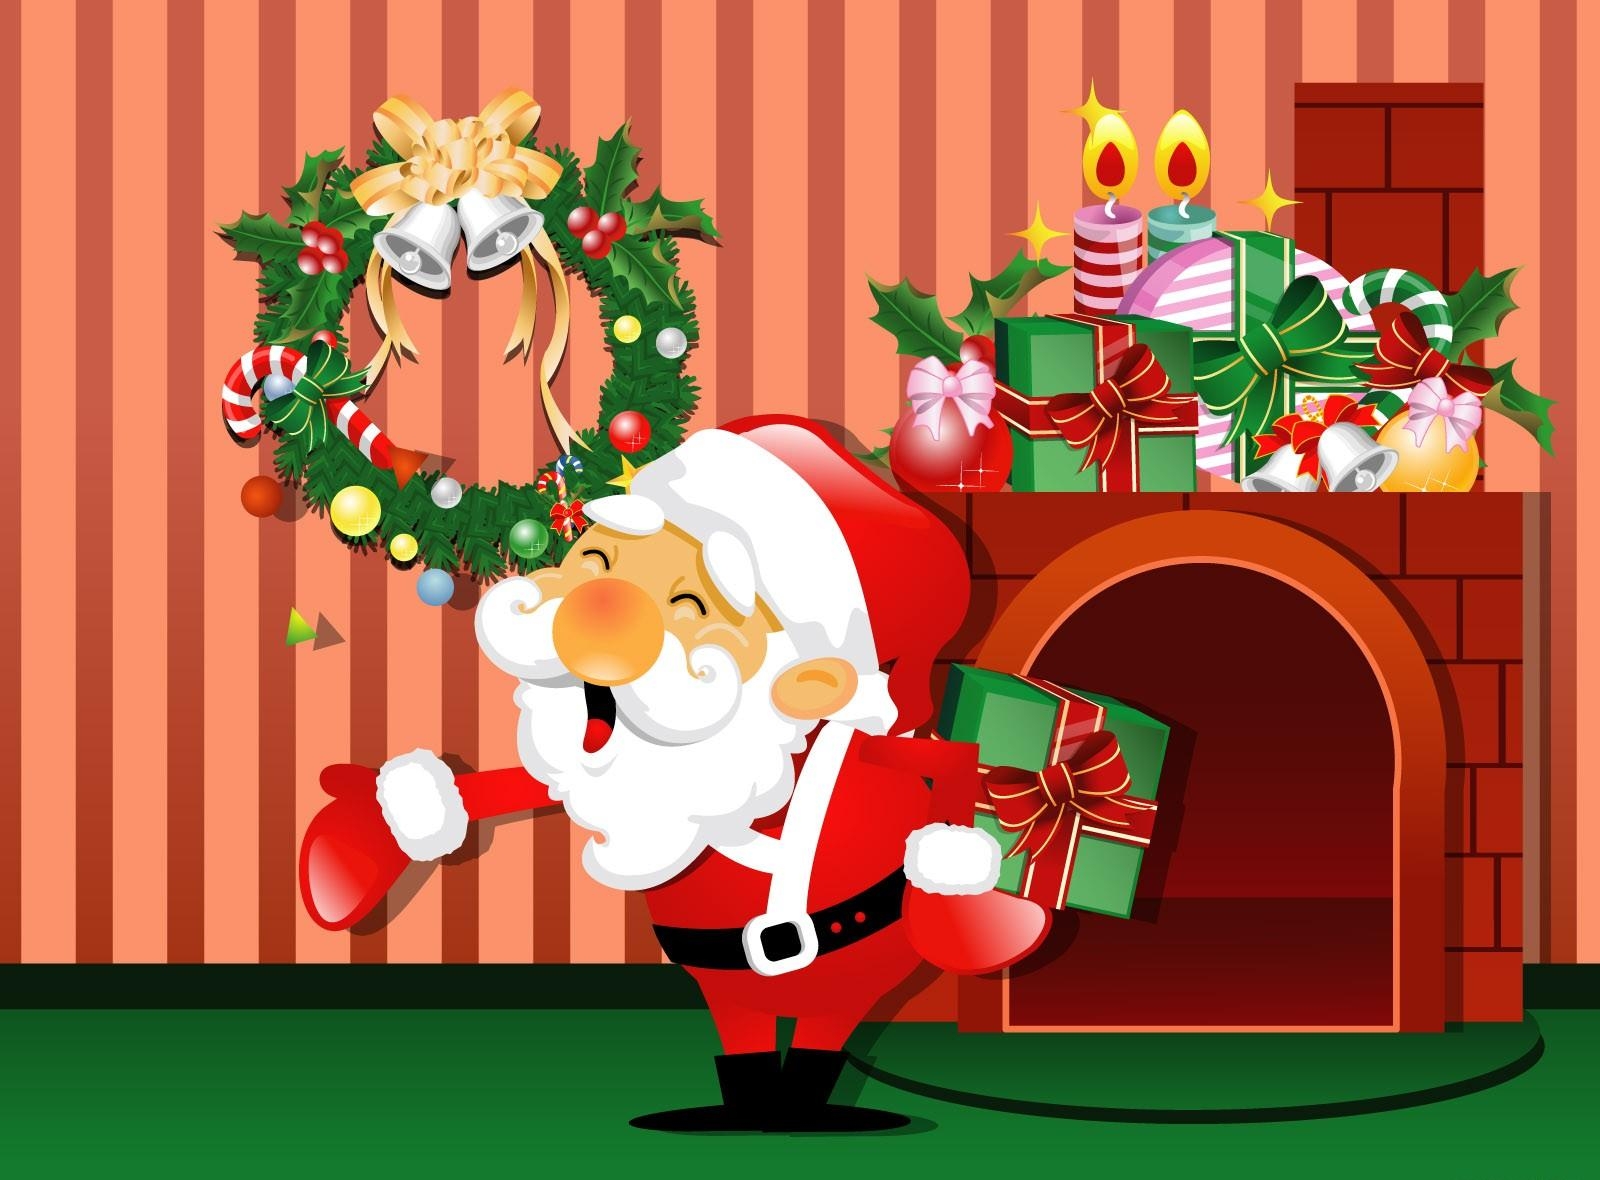 christmas, holidays, santa claus, house, fireplace, presents, gifts